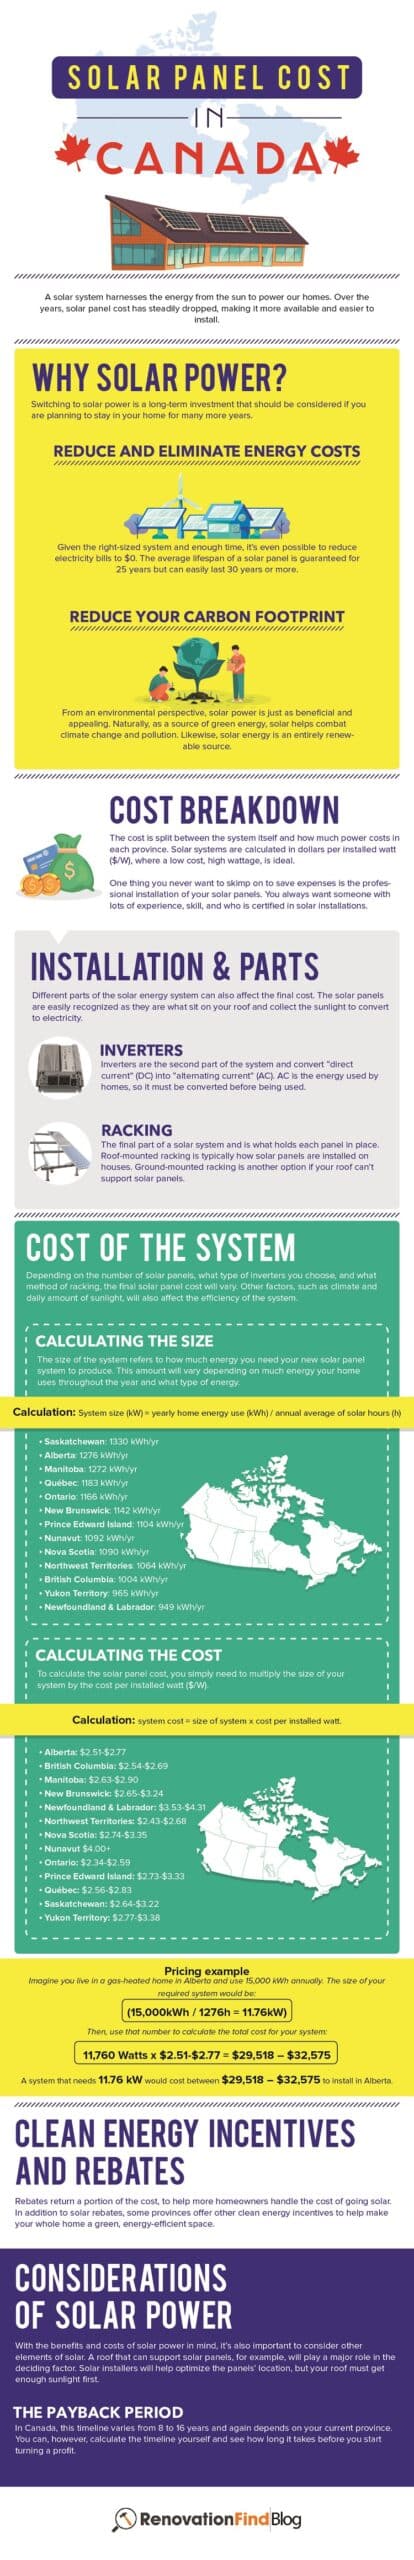 Infographic - Solar Panel Cost in Canada